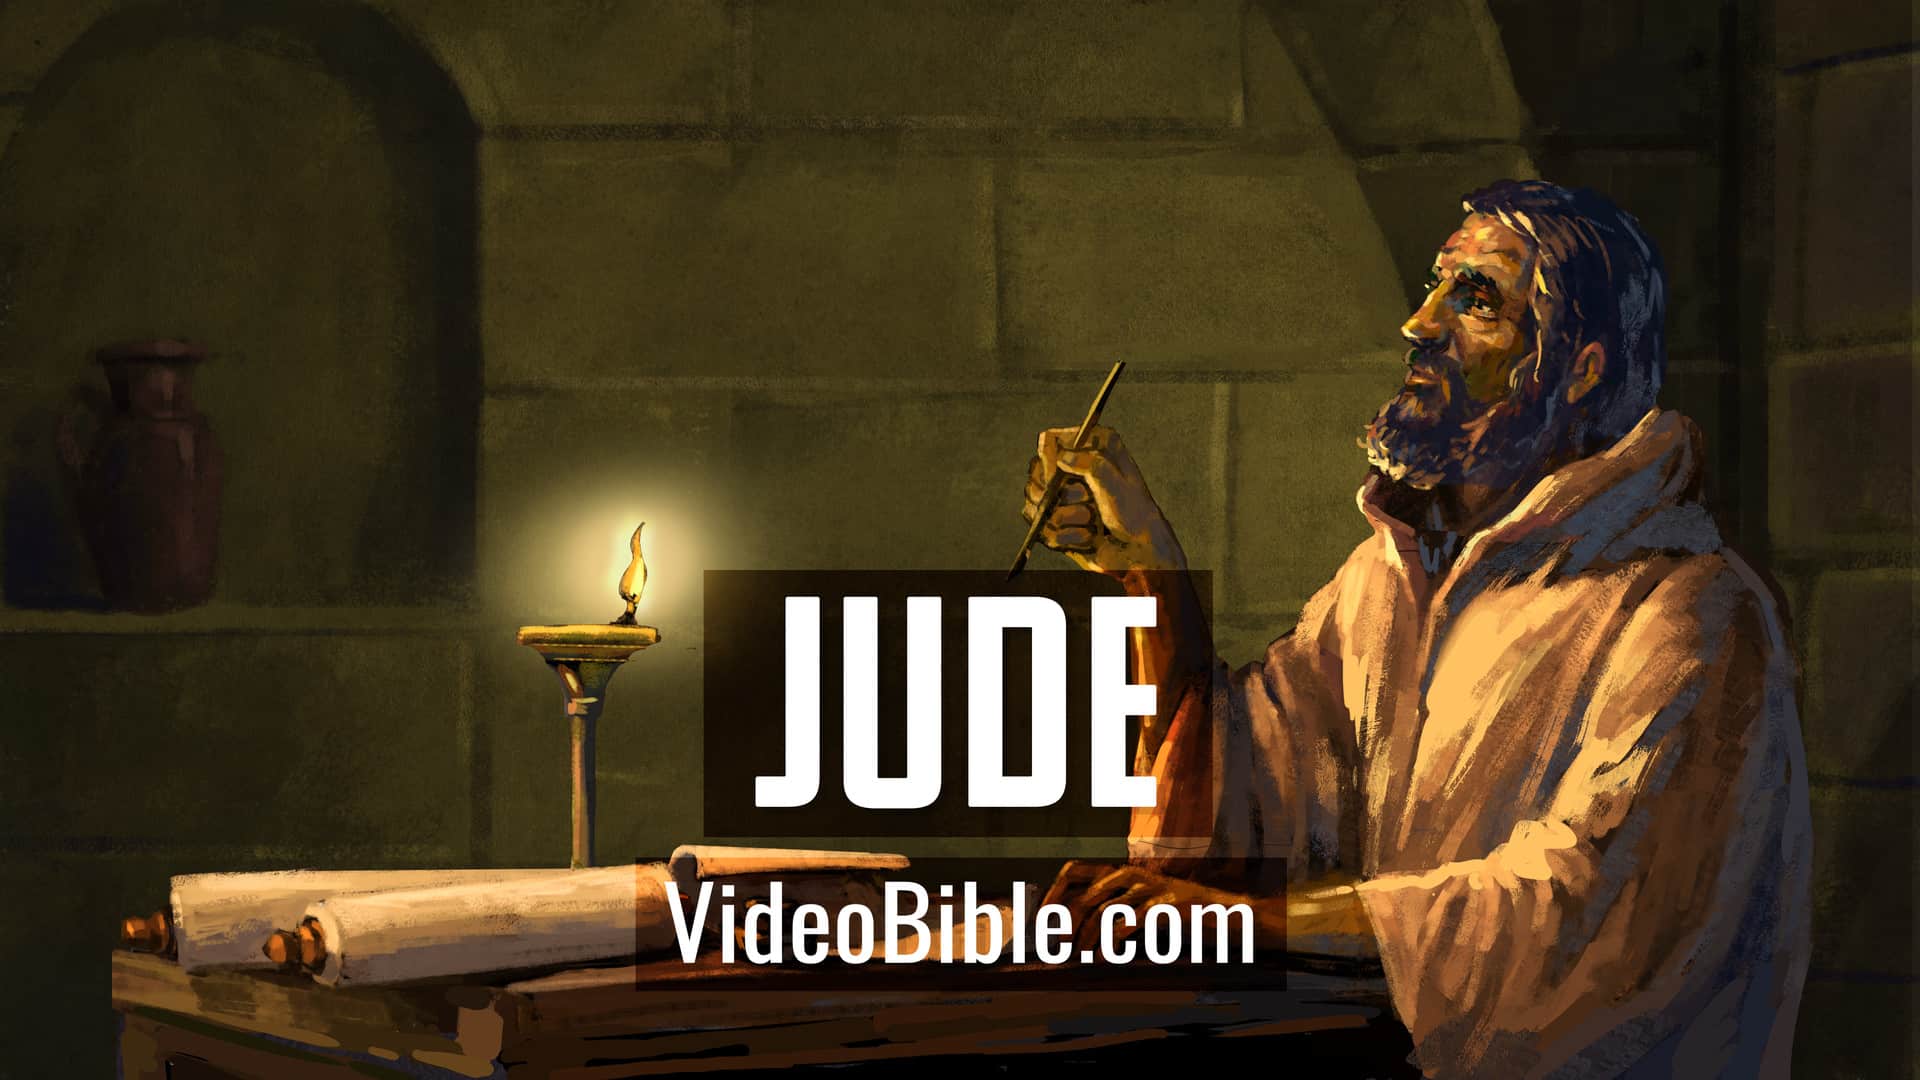 Jude the brother of Jesus